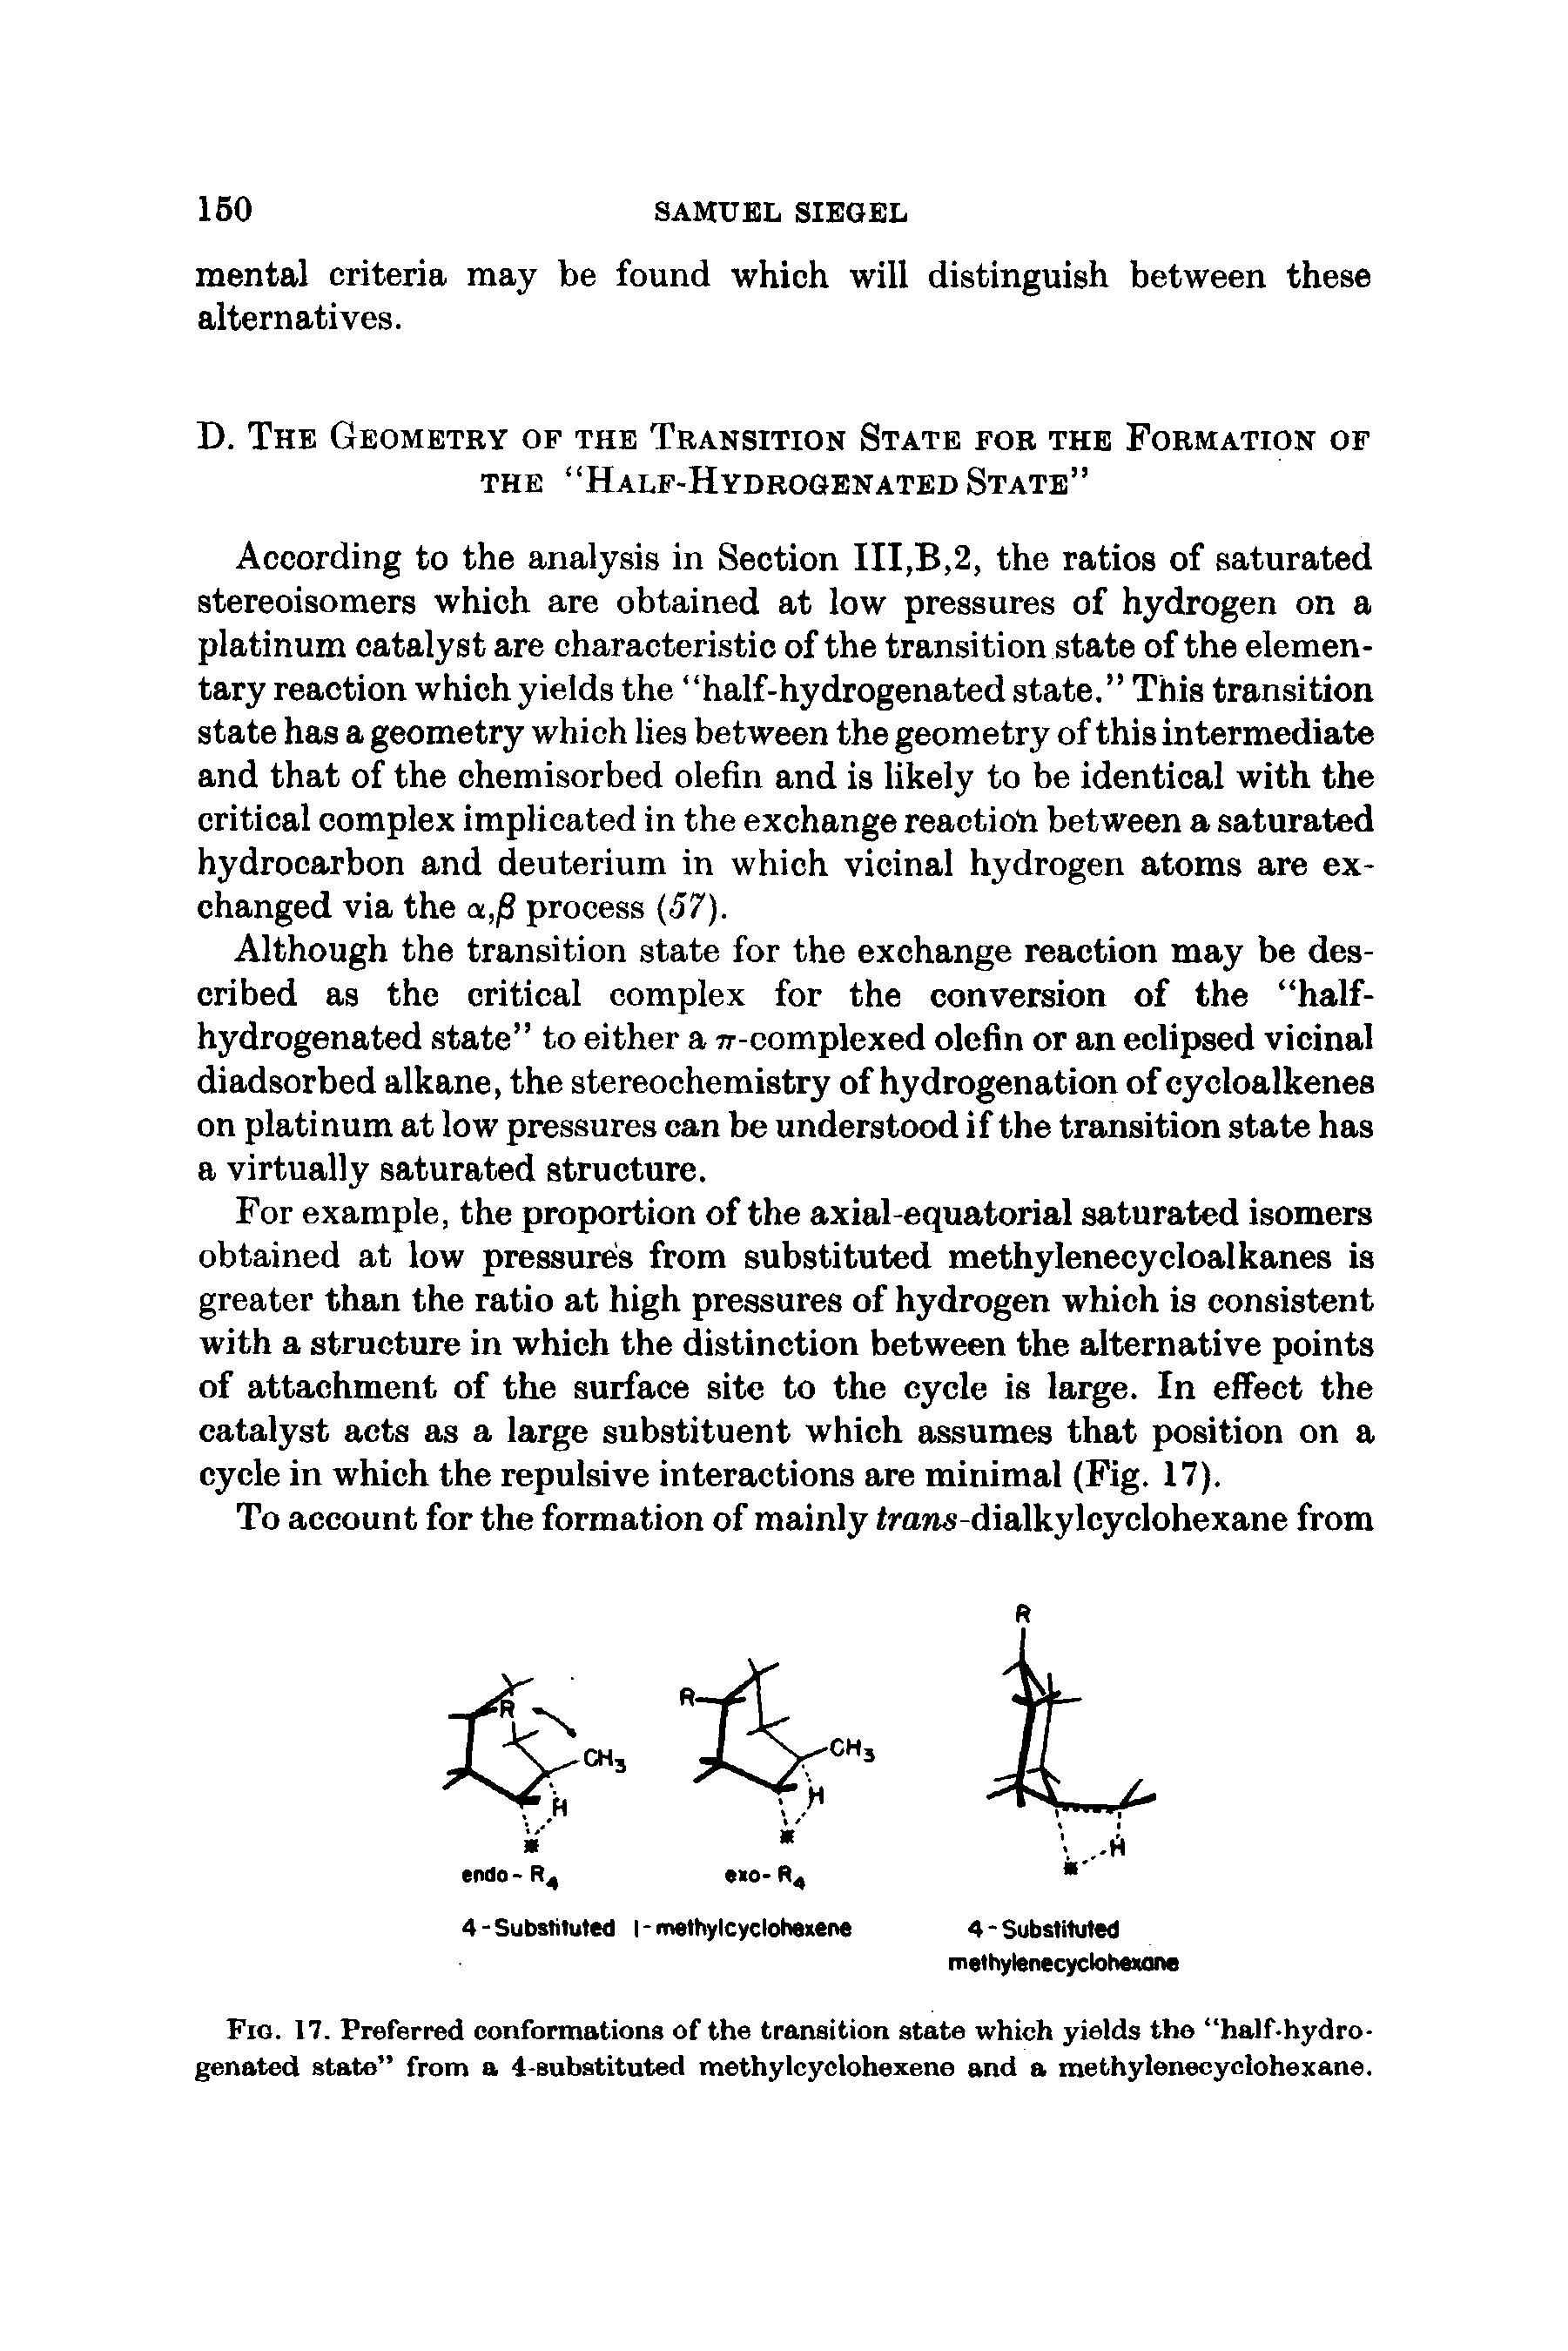 Fig. 17. Preferred conformations of the transition state which yields the half-hydrogenated state from a 4-substituted methylcyclohexene and a methylenecyclohexane.